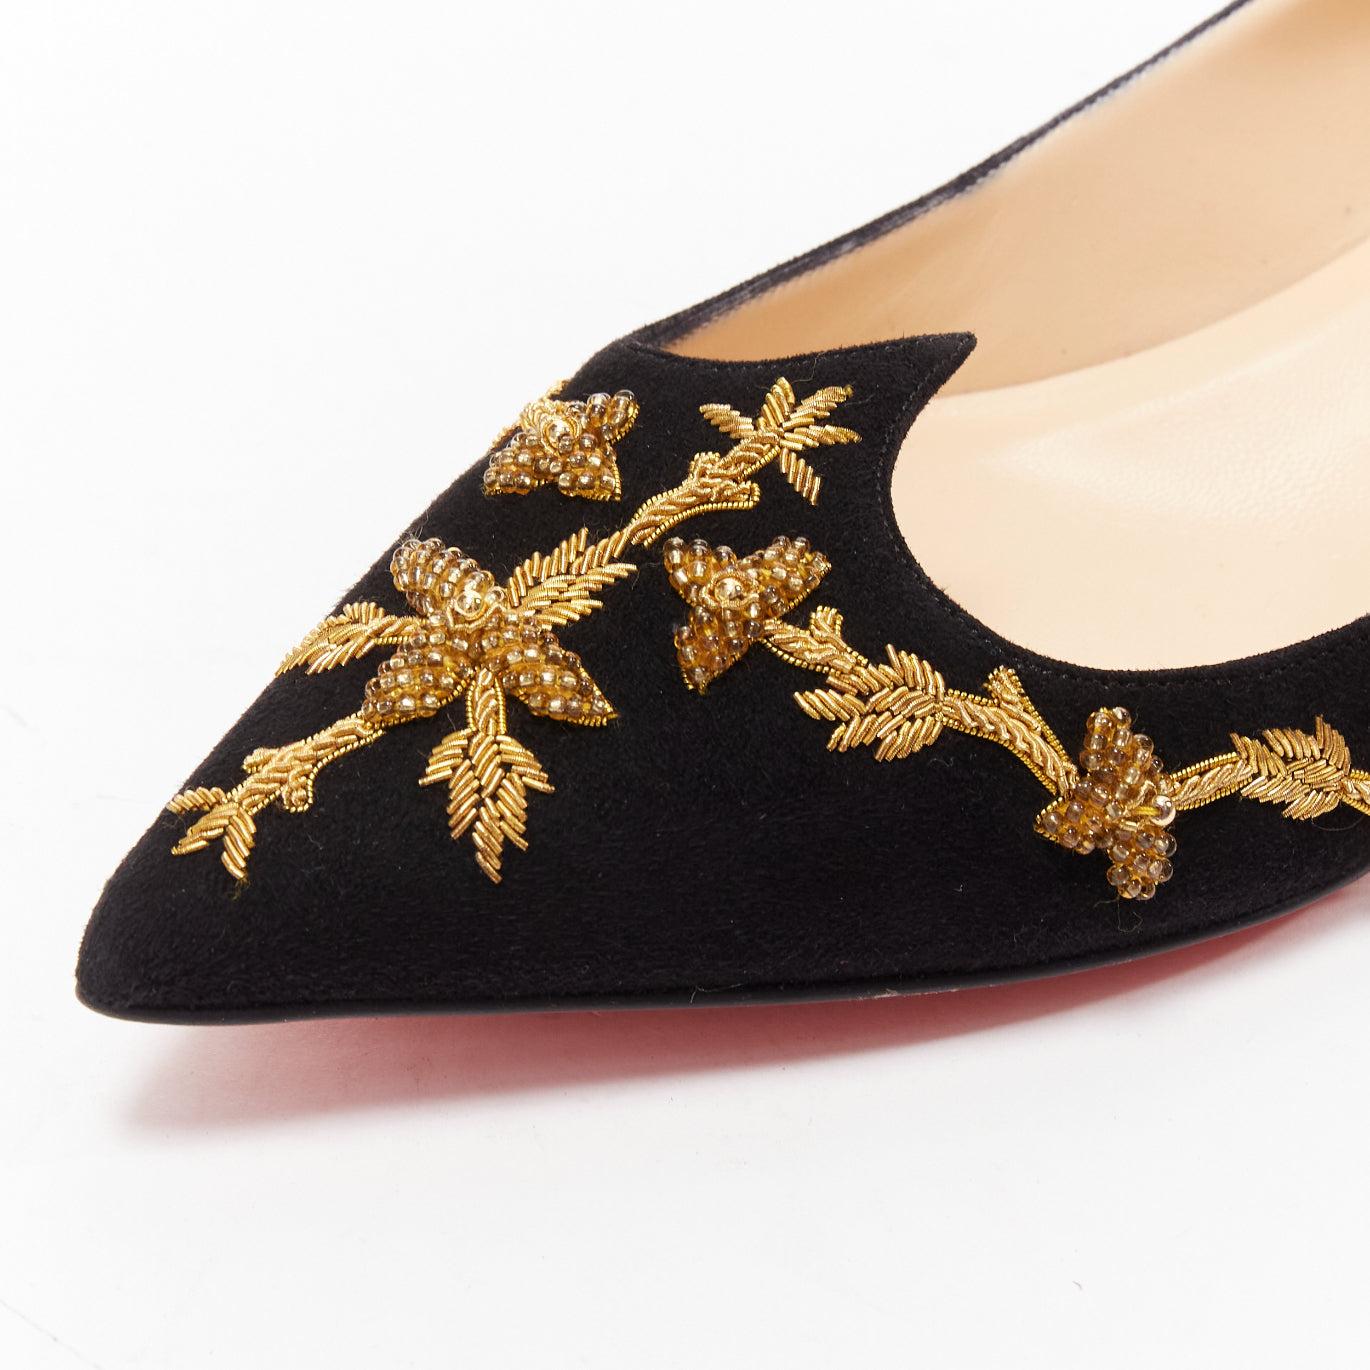 CHRISTIAN LOUBOUTIN black gold embroidery suede leather pointy flats EU35.5 For Sale 3